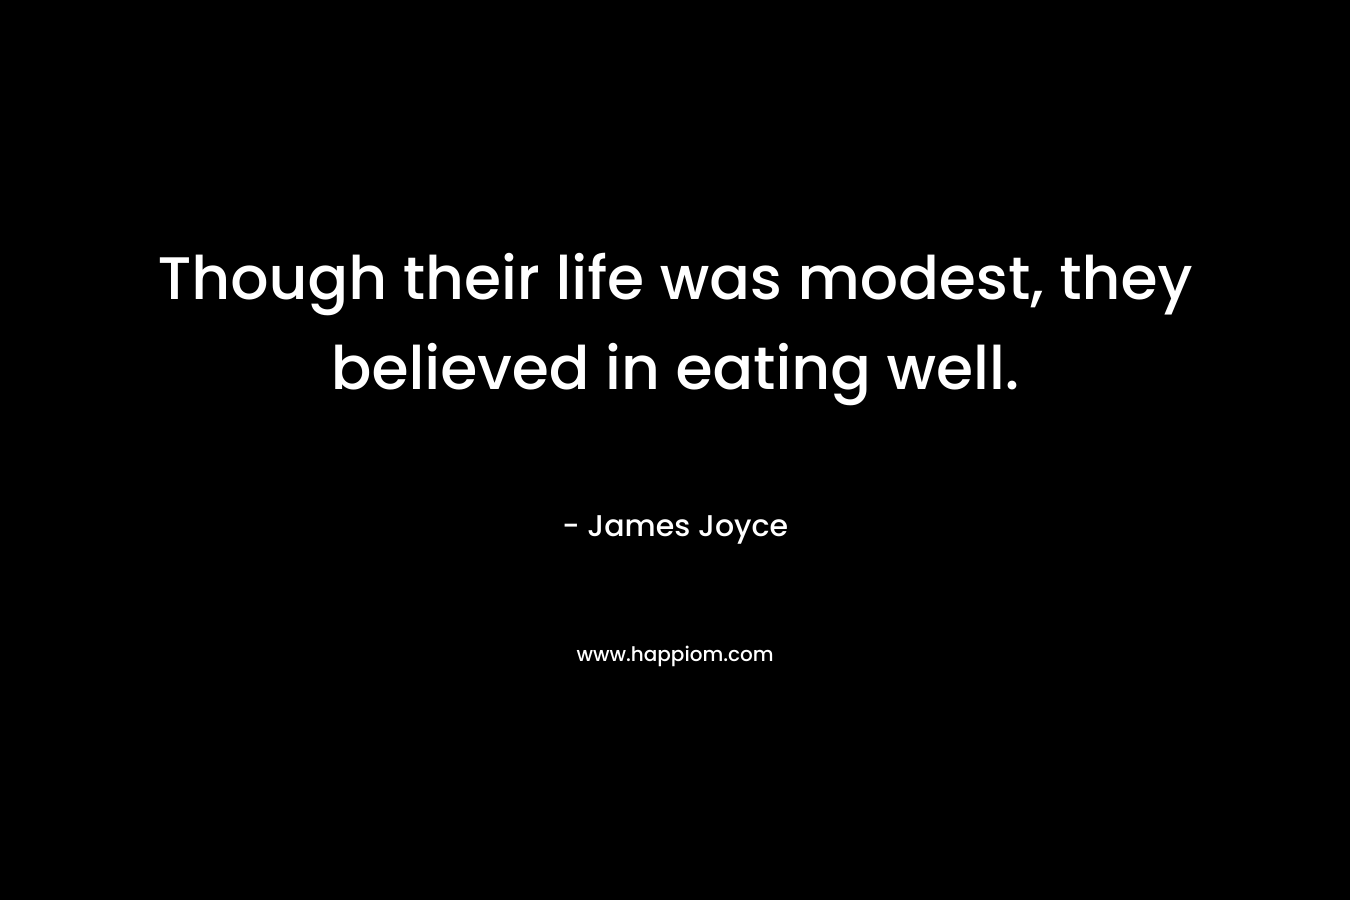 Though their life was modest, they believed in eating well. – James Joyce